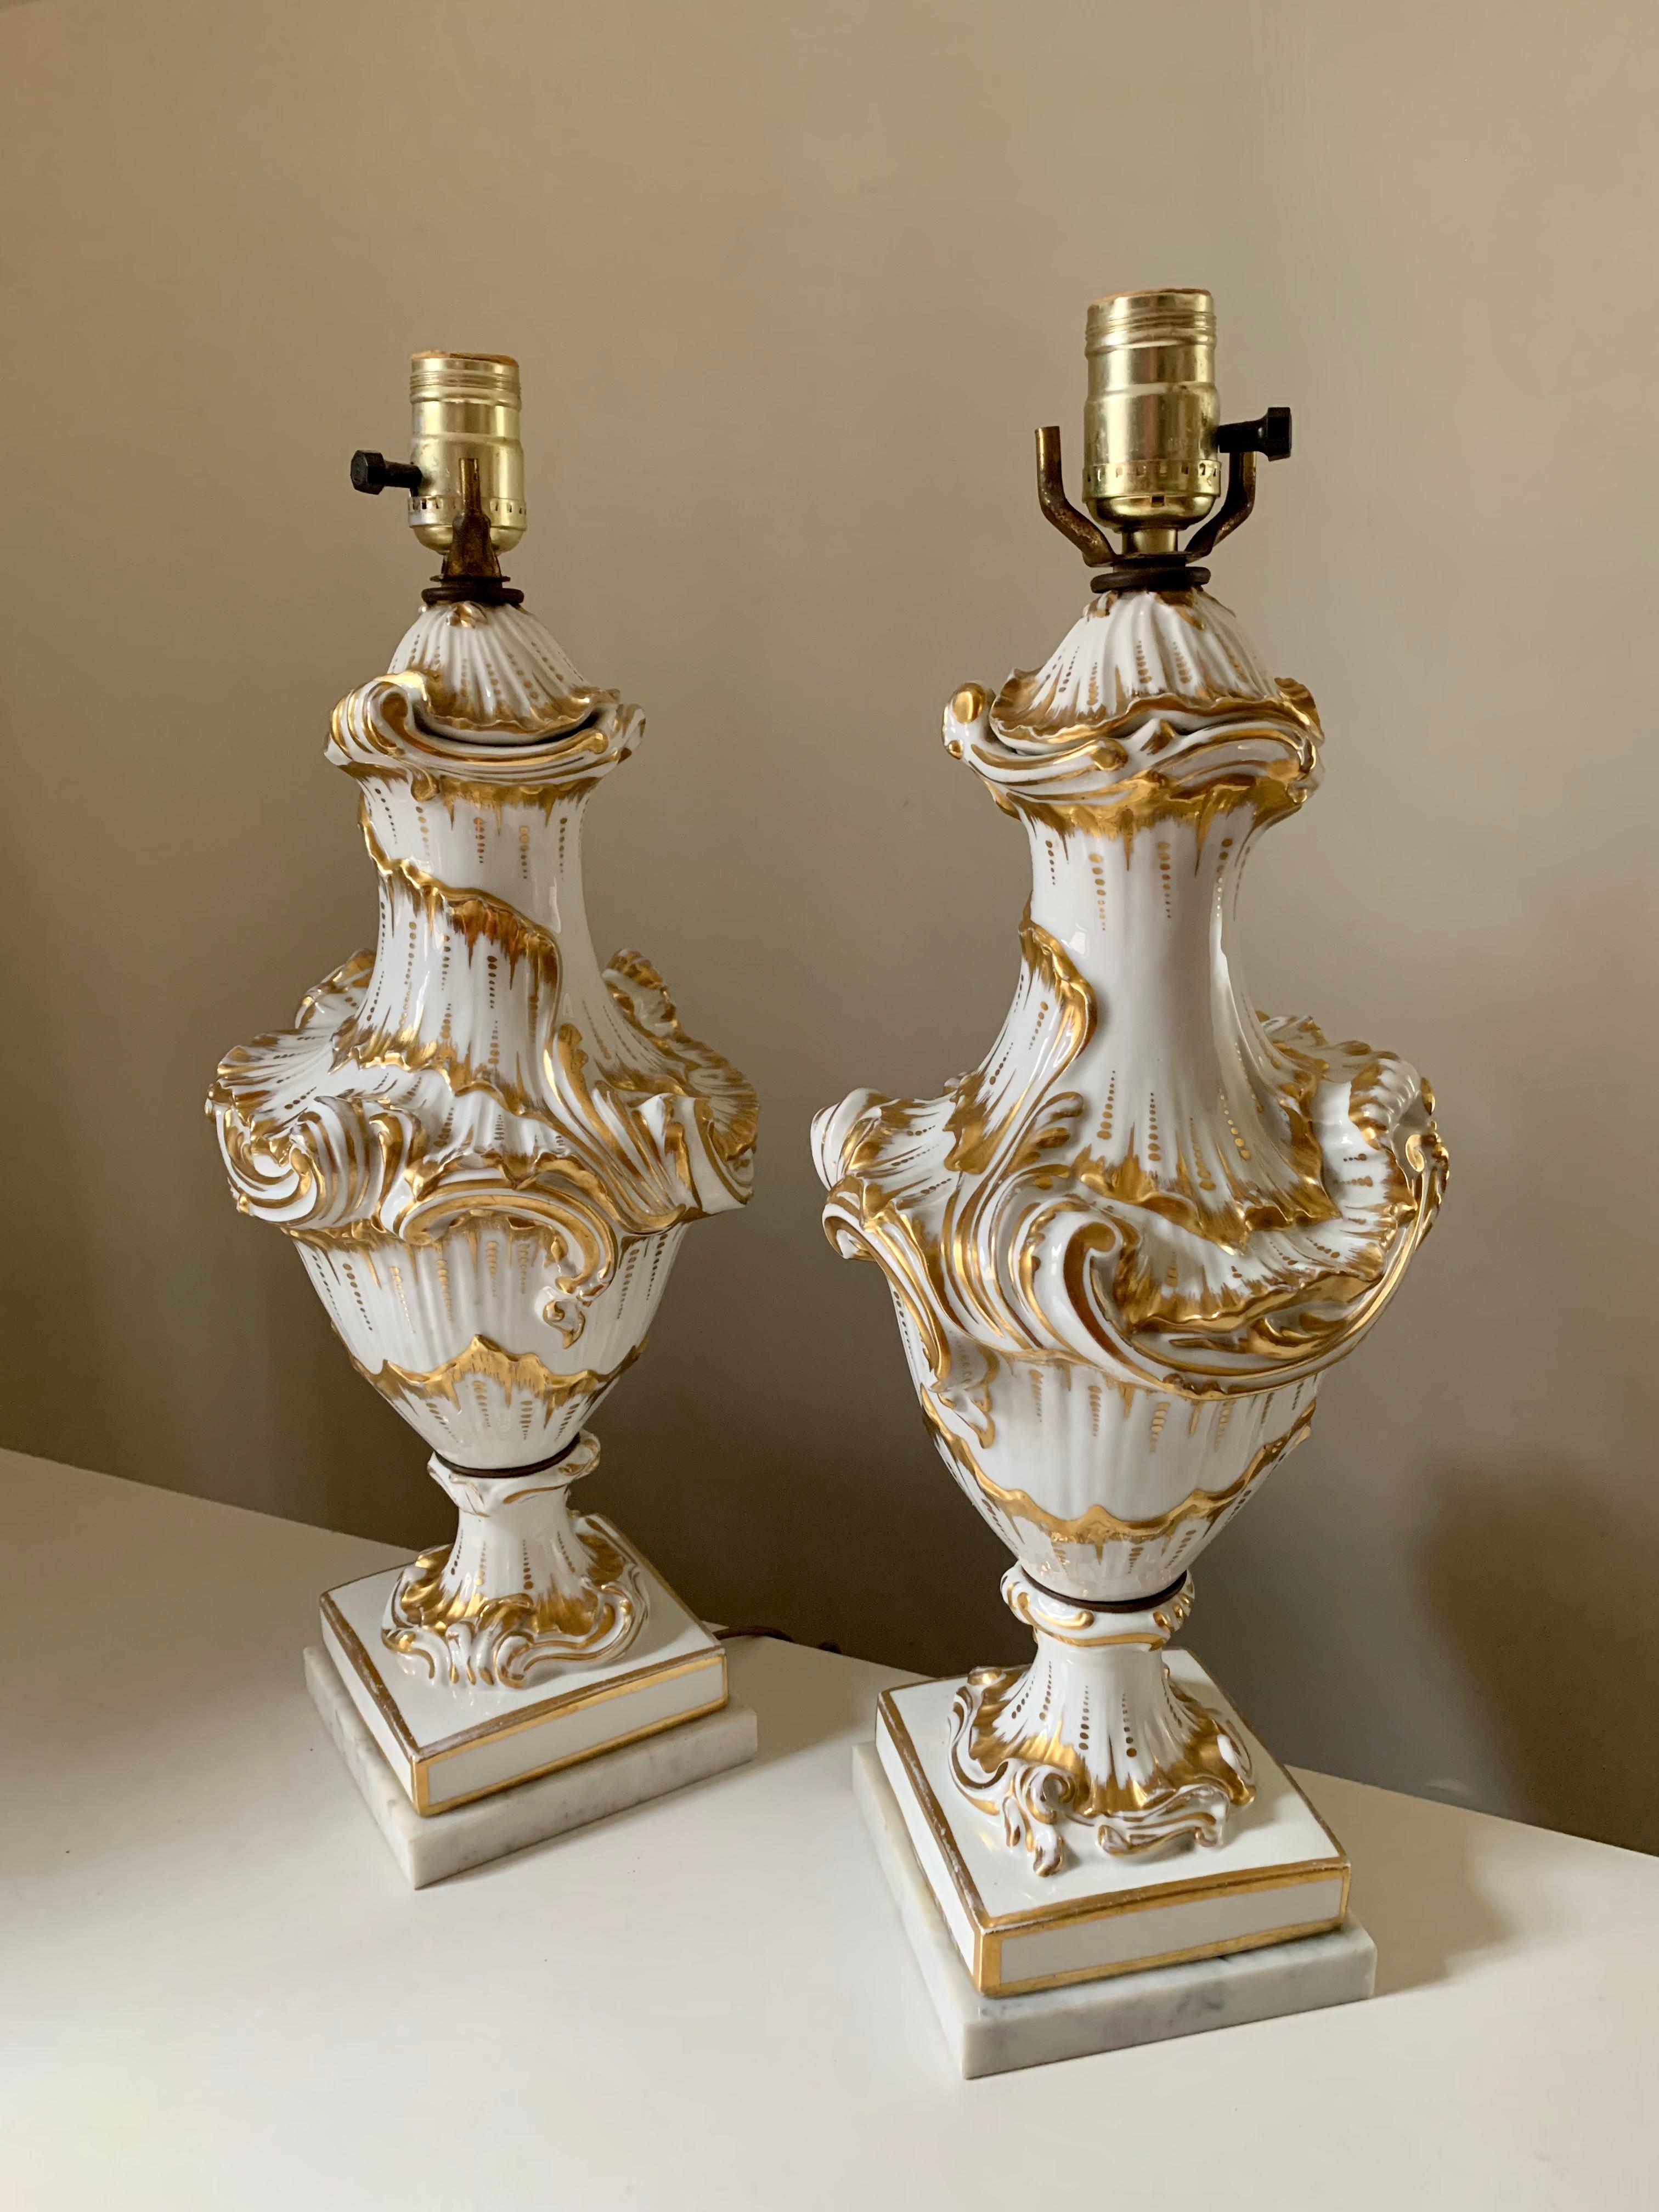 Fine Pair Rococo Style White and Gold Porcelain Table Lamps, 19th Century For Sale 5